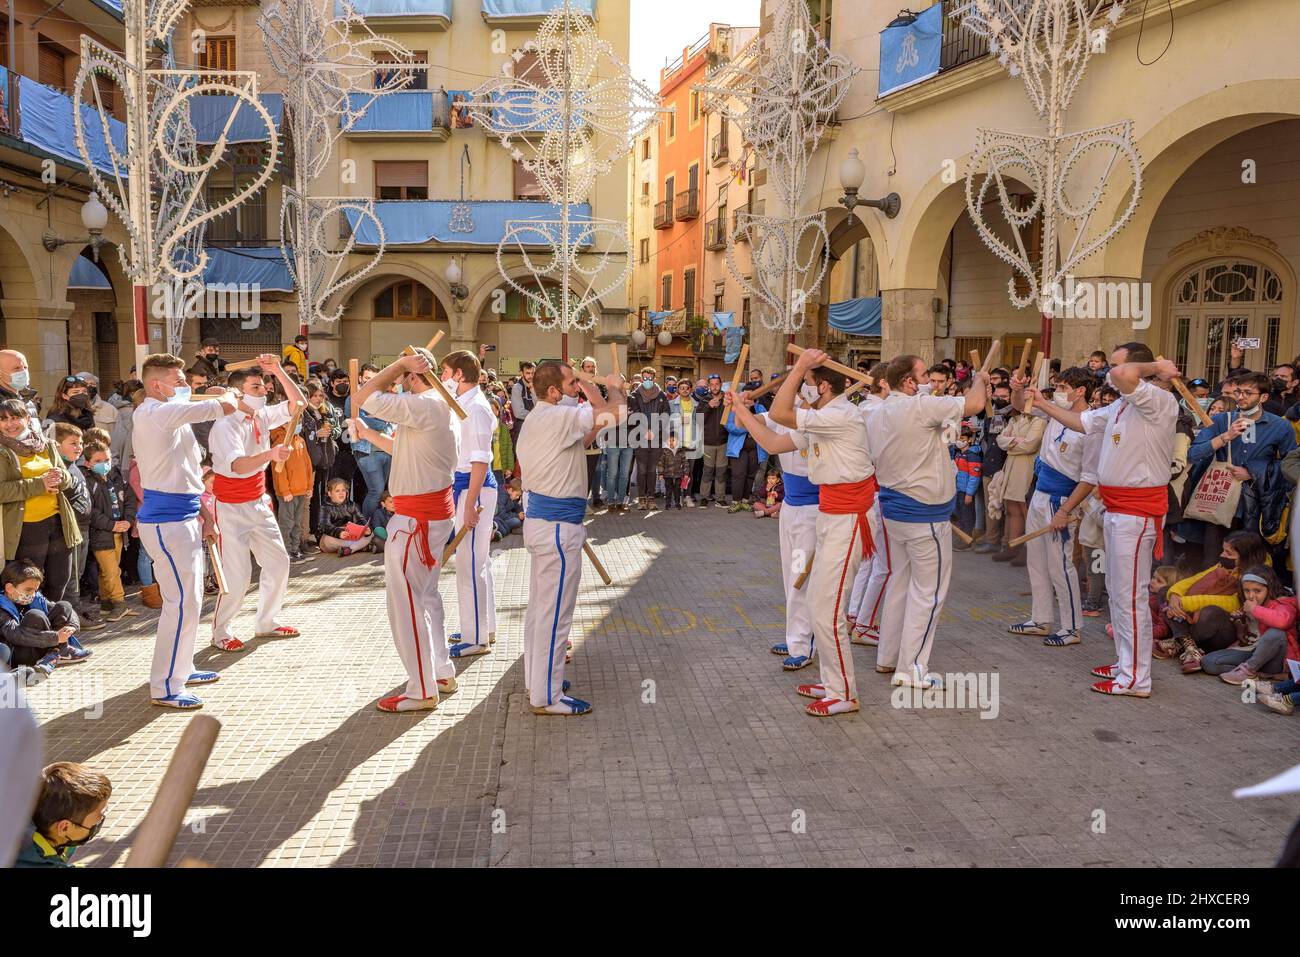 Ball de bastons (stick dance) of Montblanc at the 2022 Valls Decennial Festival, in honor of the Virgin of the Candlemas in Valls (Tarragona, Spain) Stock Photo